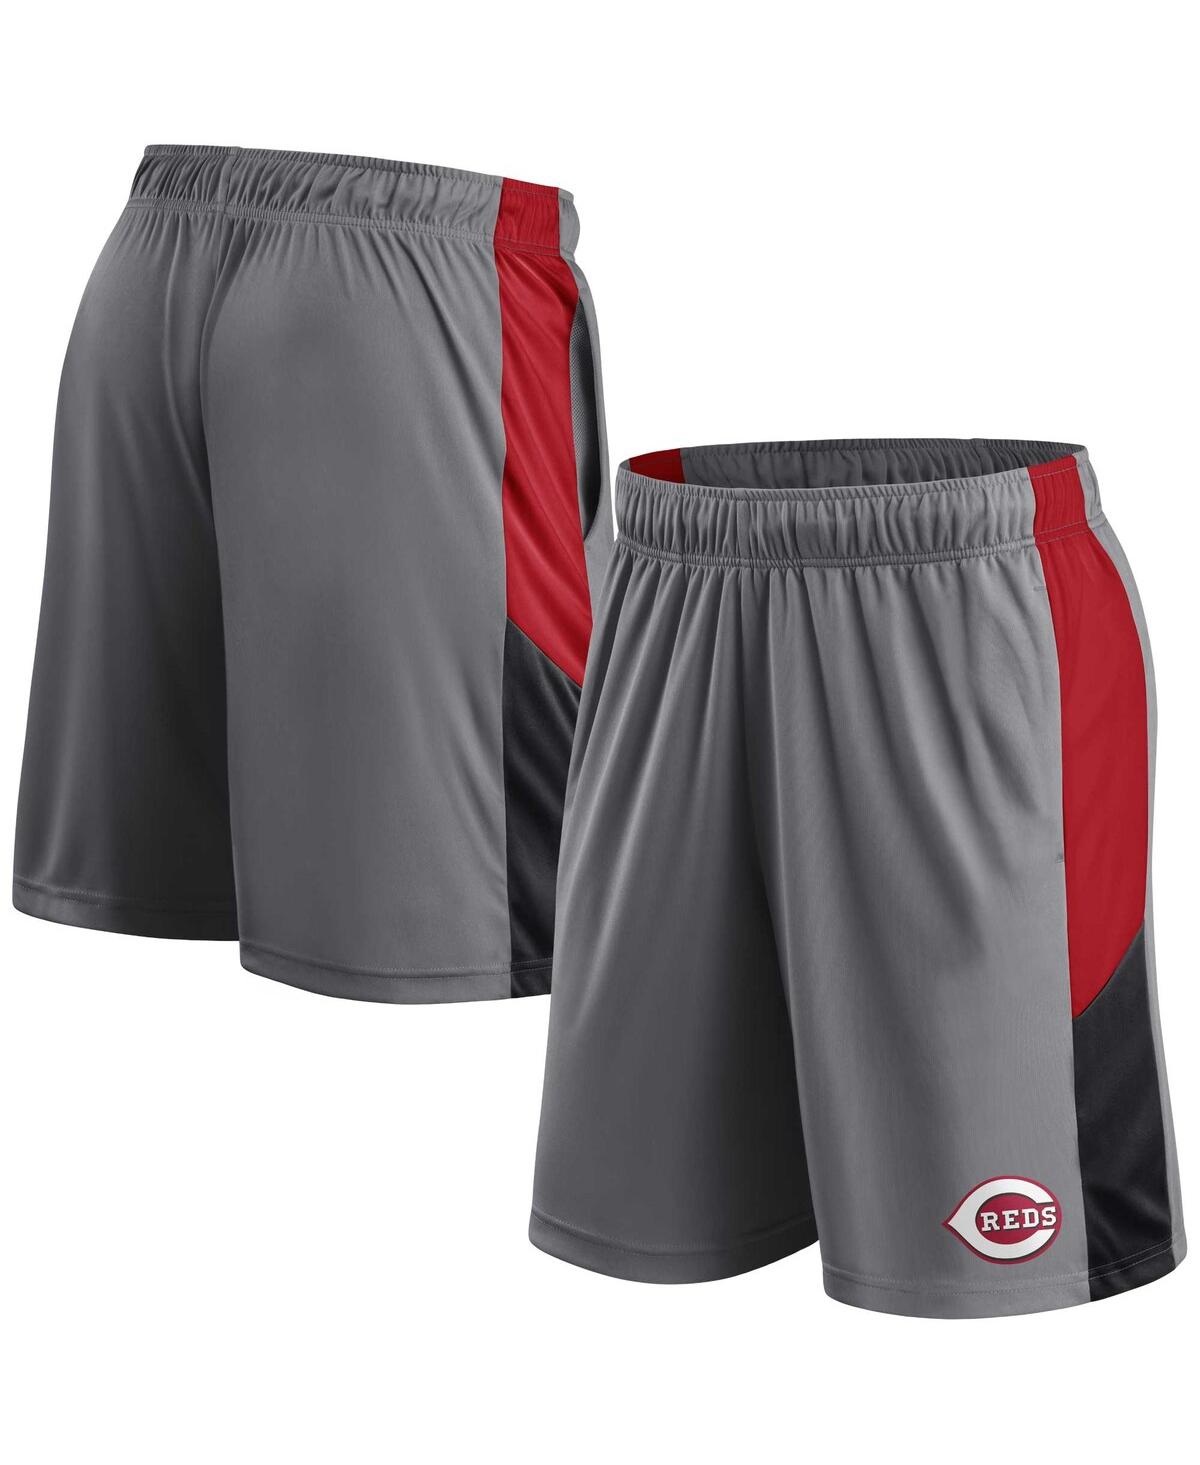 Men's Profile Gray, Red Cincinnati Reds Big and Tall Team Shorts - Gray, Red